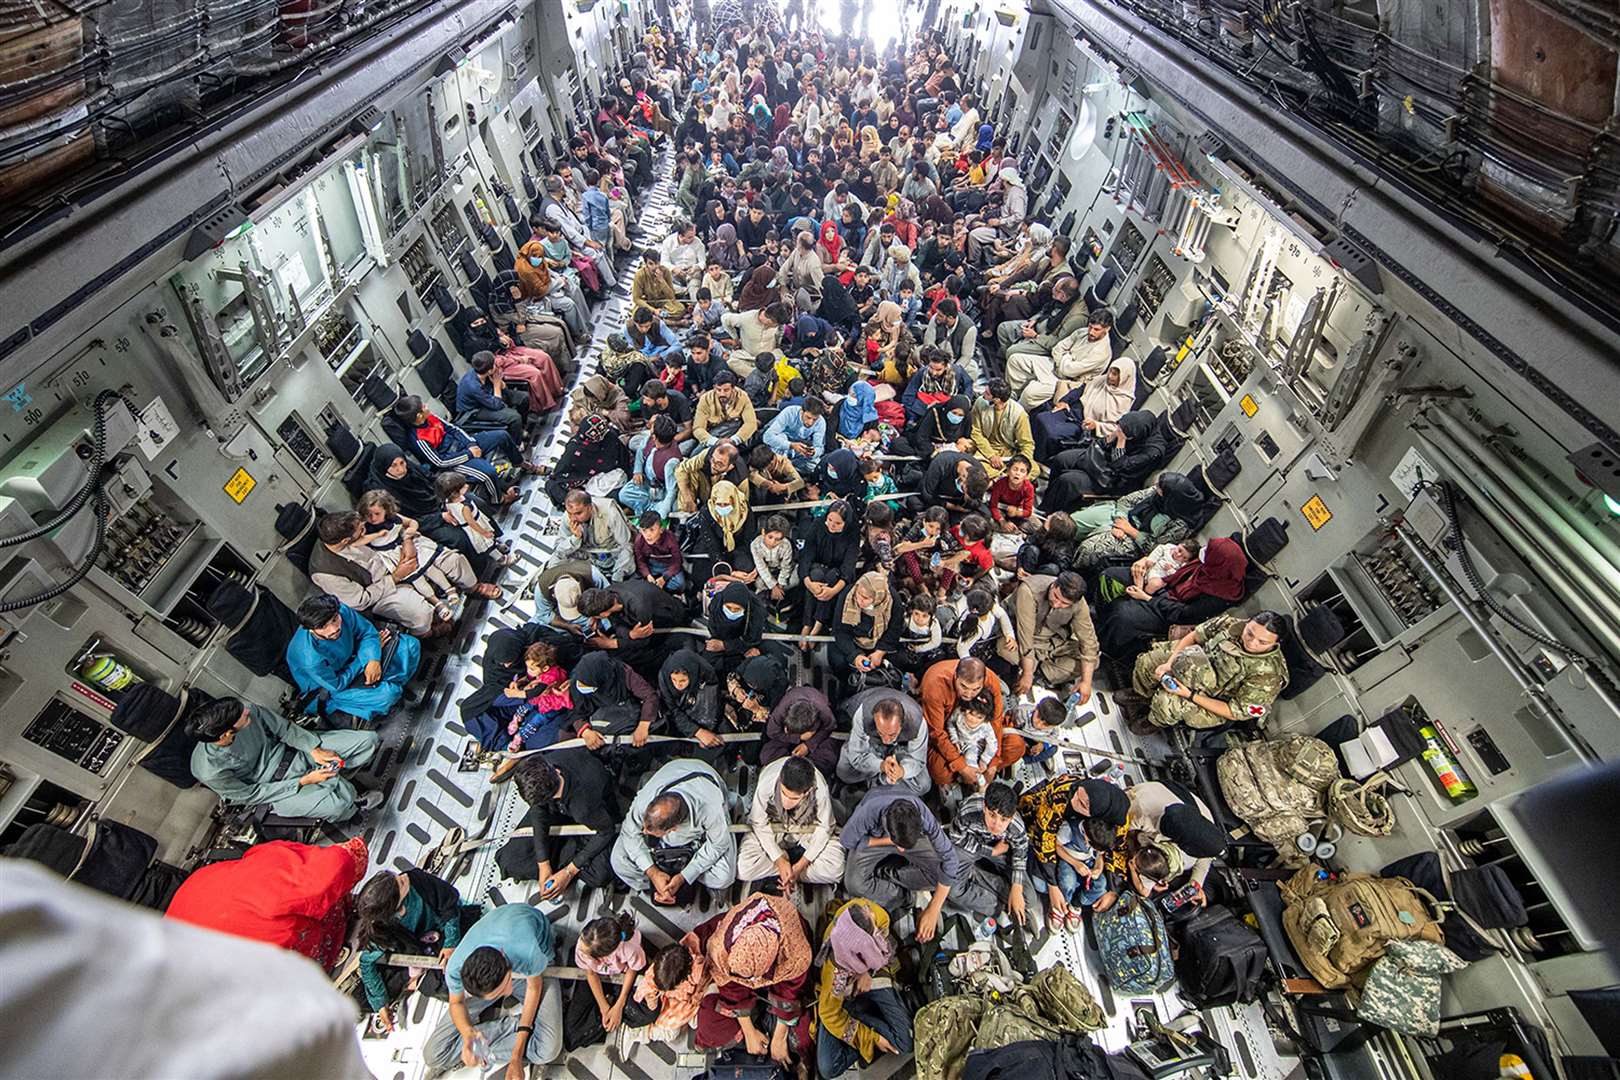 A full flight of 265 people supported by members of the UK Armed Forces on board an evacuation flight (Ministry of Defence/PA)